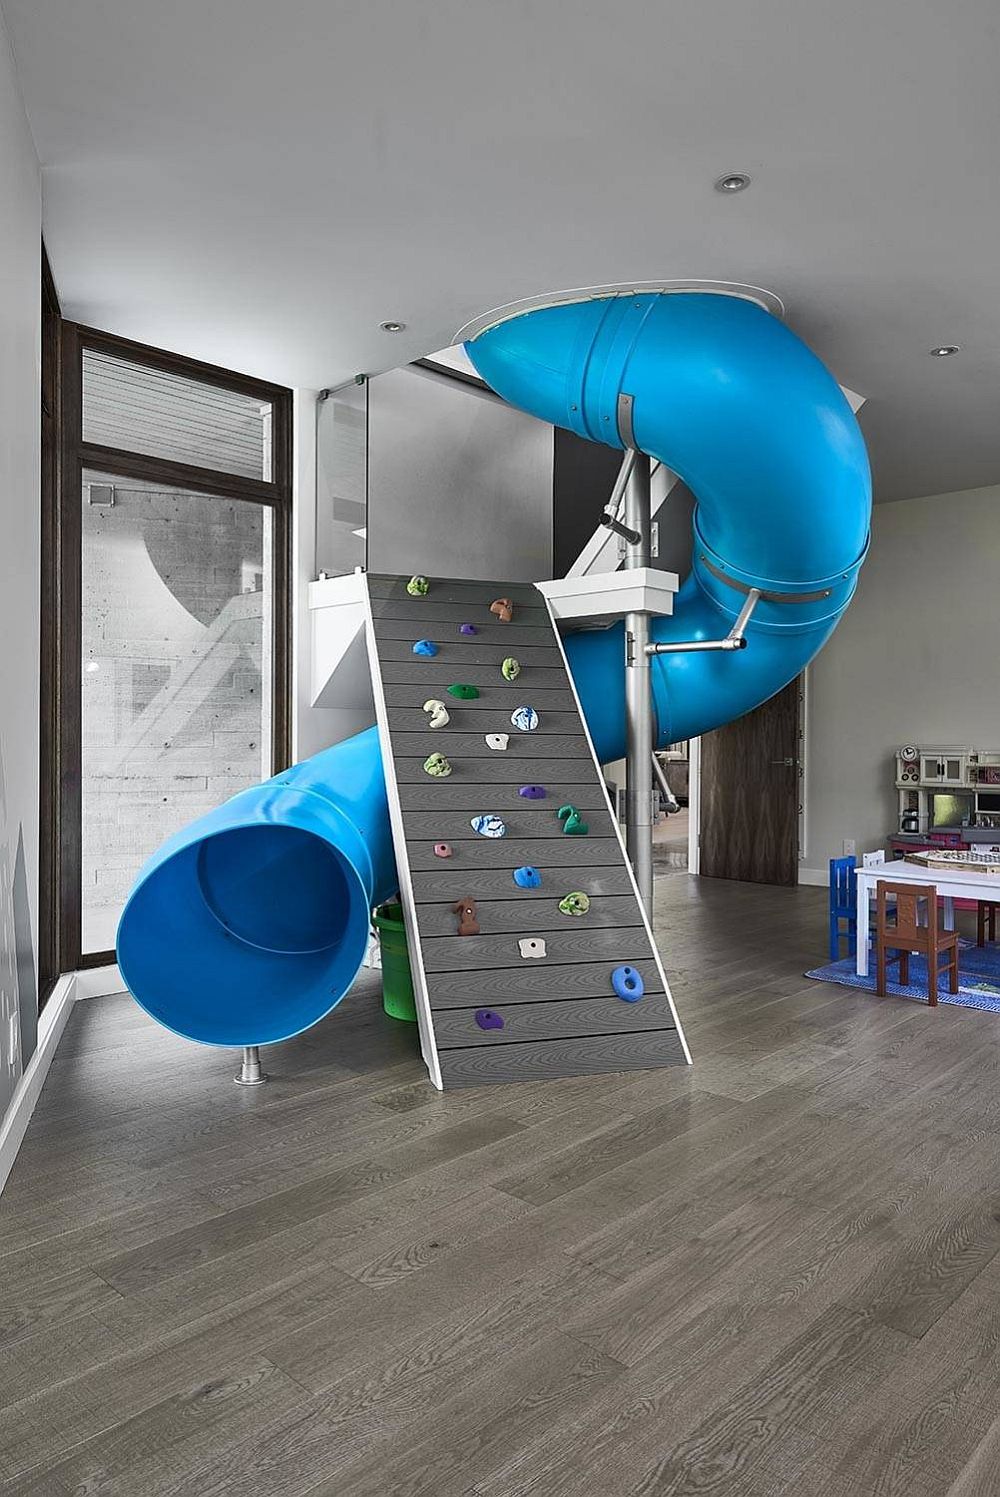 Climbing Walls With Tube Slides